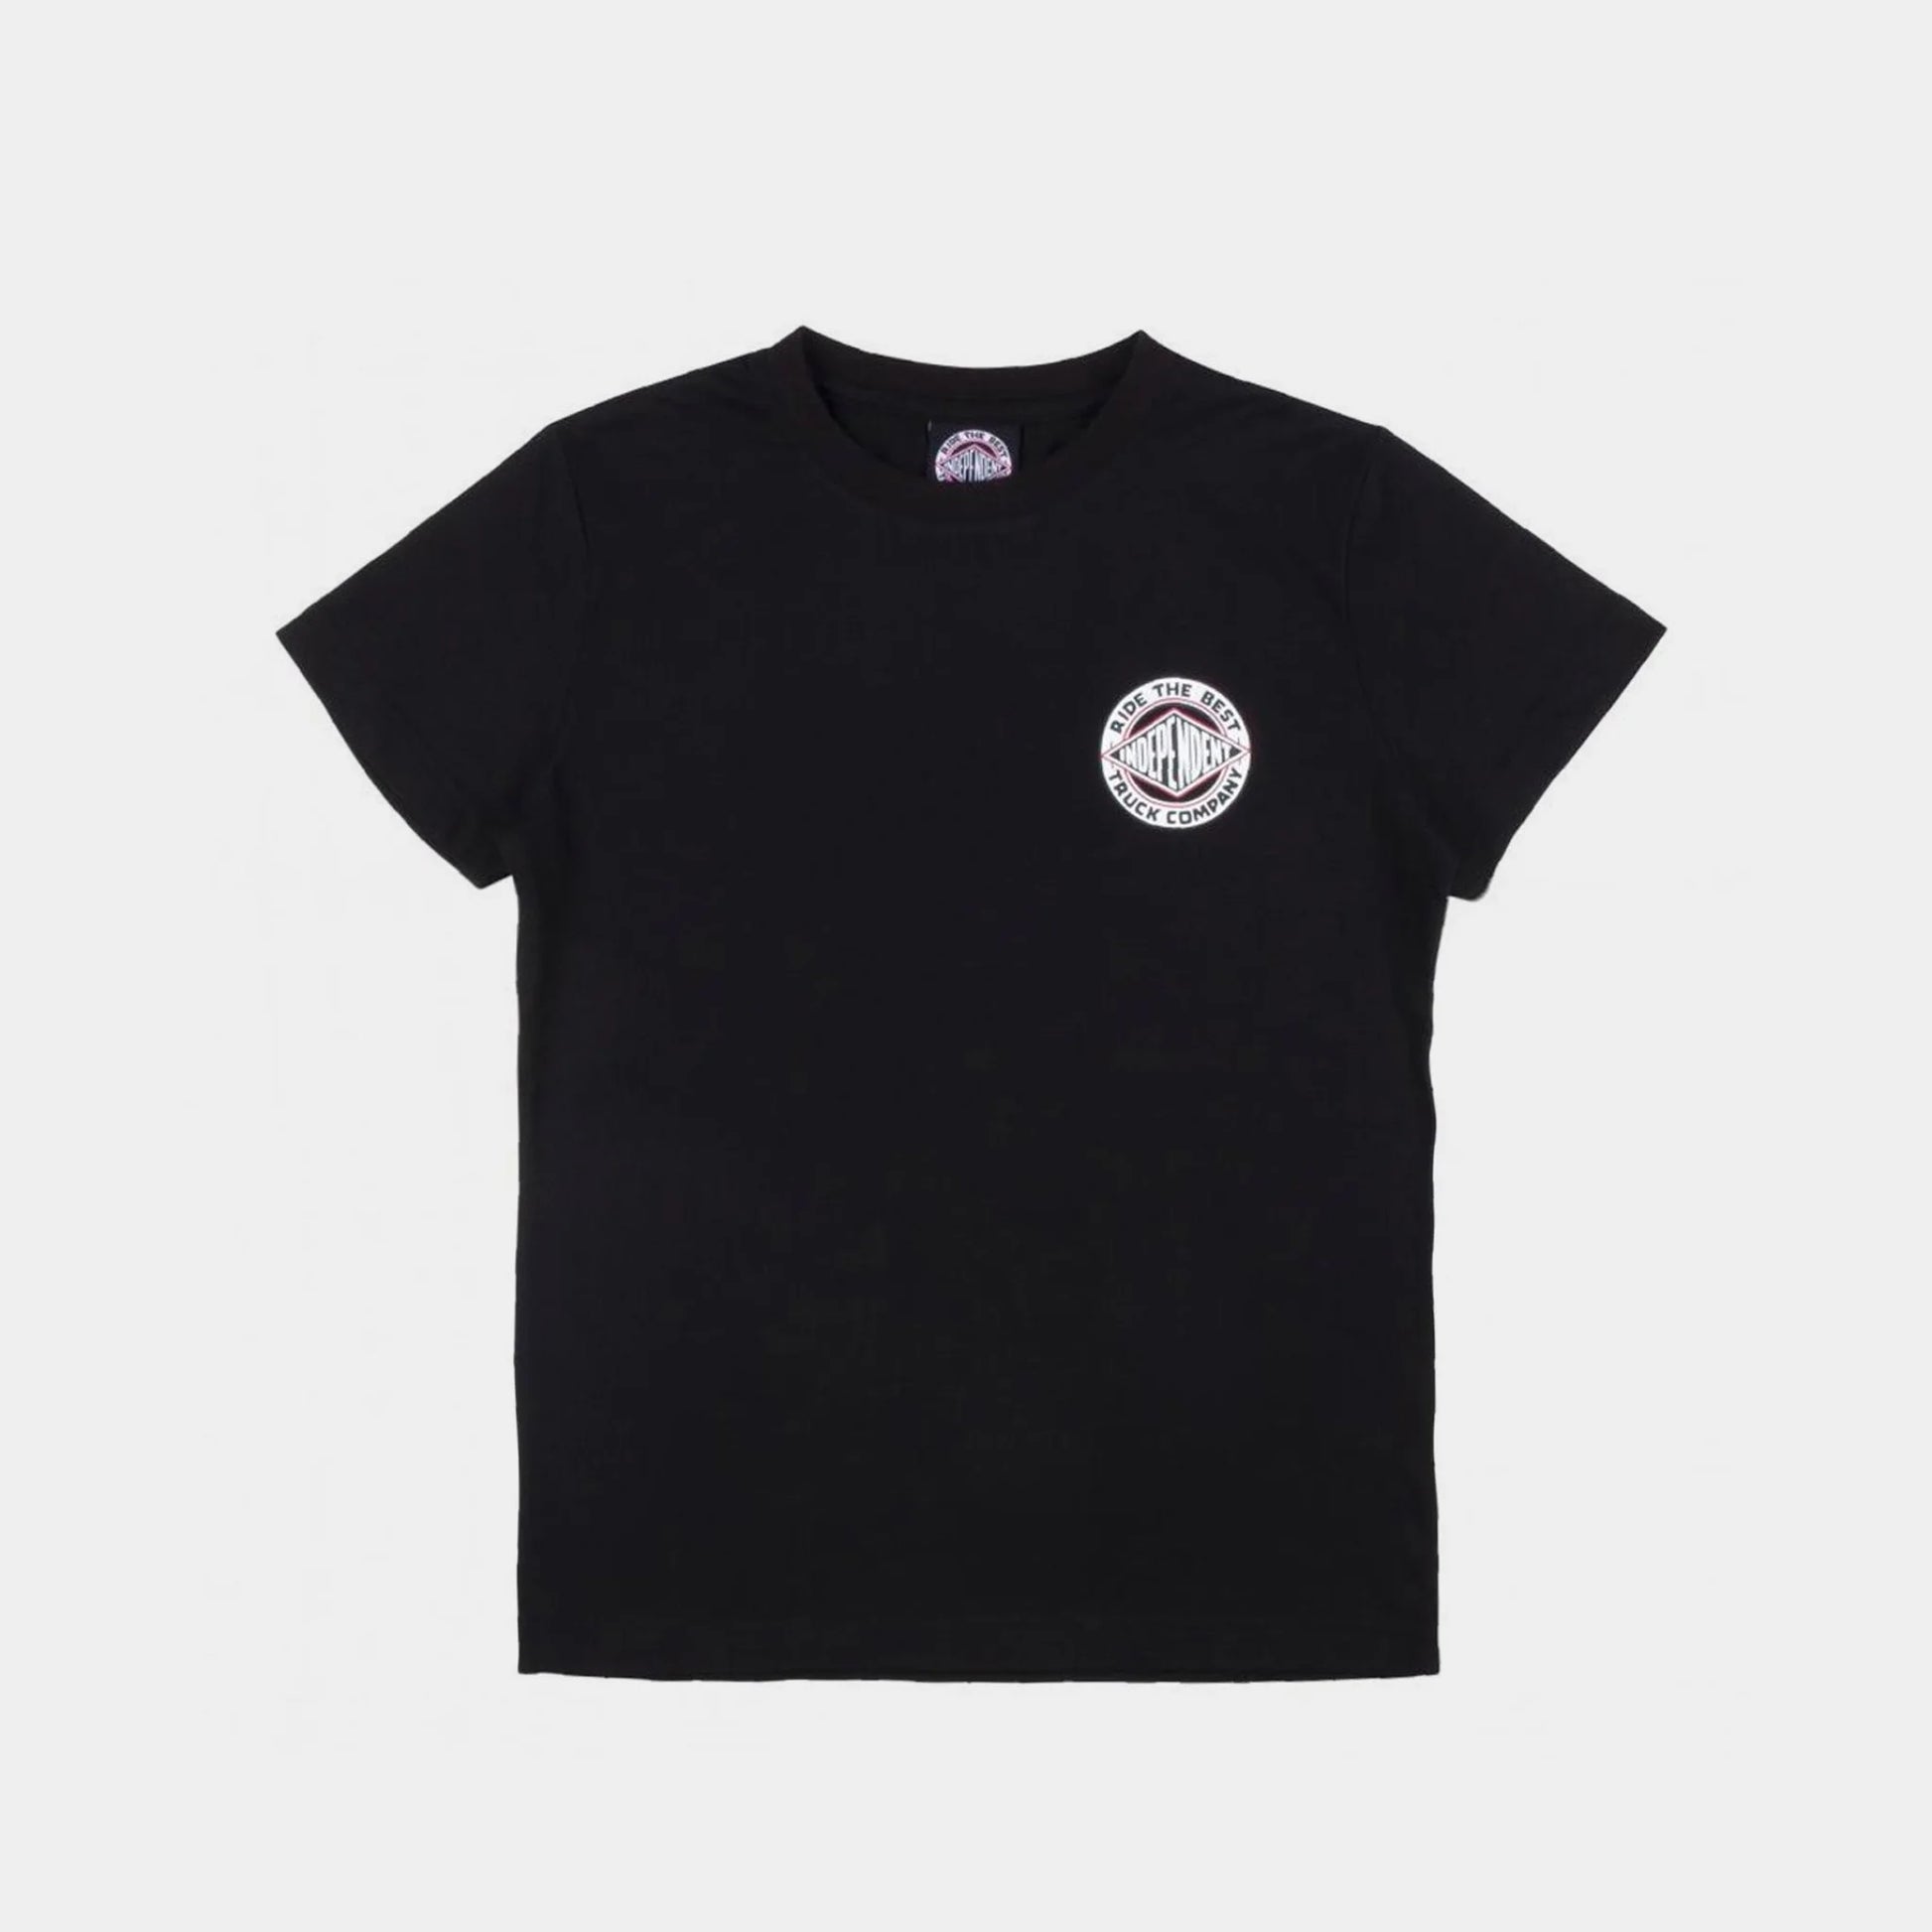 Independent Youth BTG Summit T Shirt - Black - Prime Delux Store